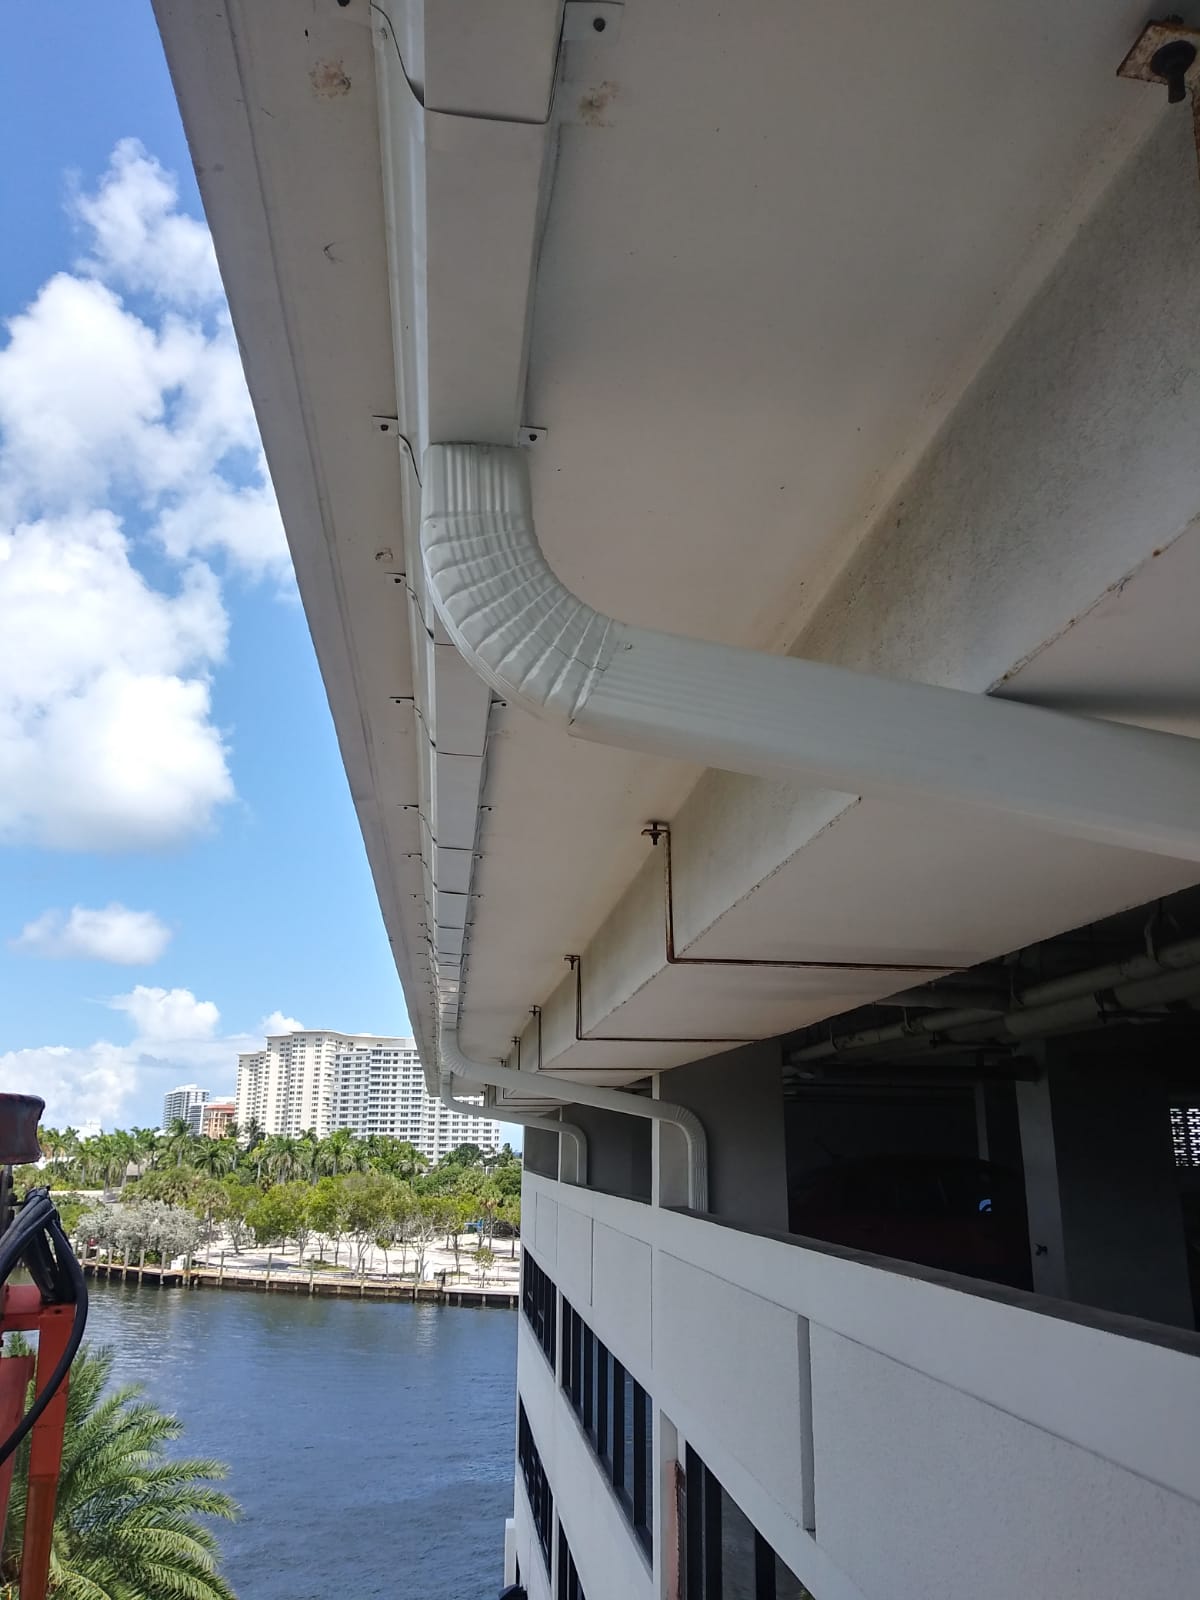 Boca Raton Commercial Gutter Installation: Waterstone Resort and Marina Project